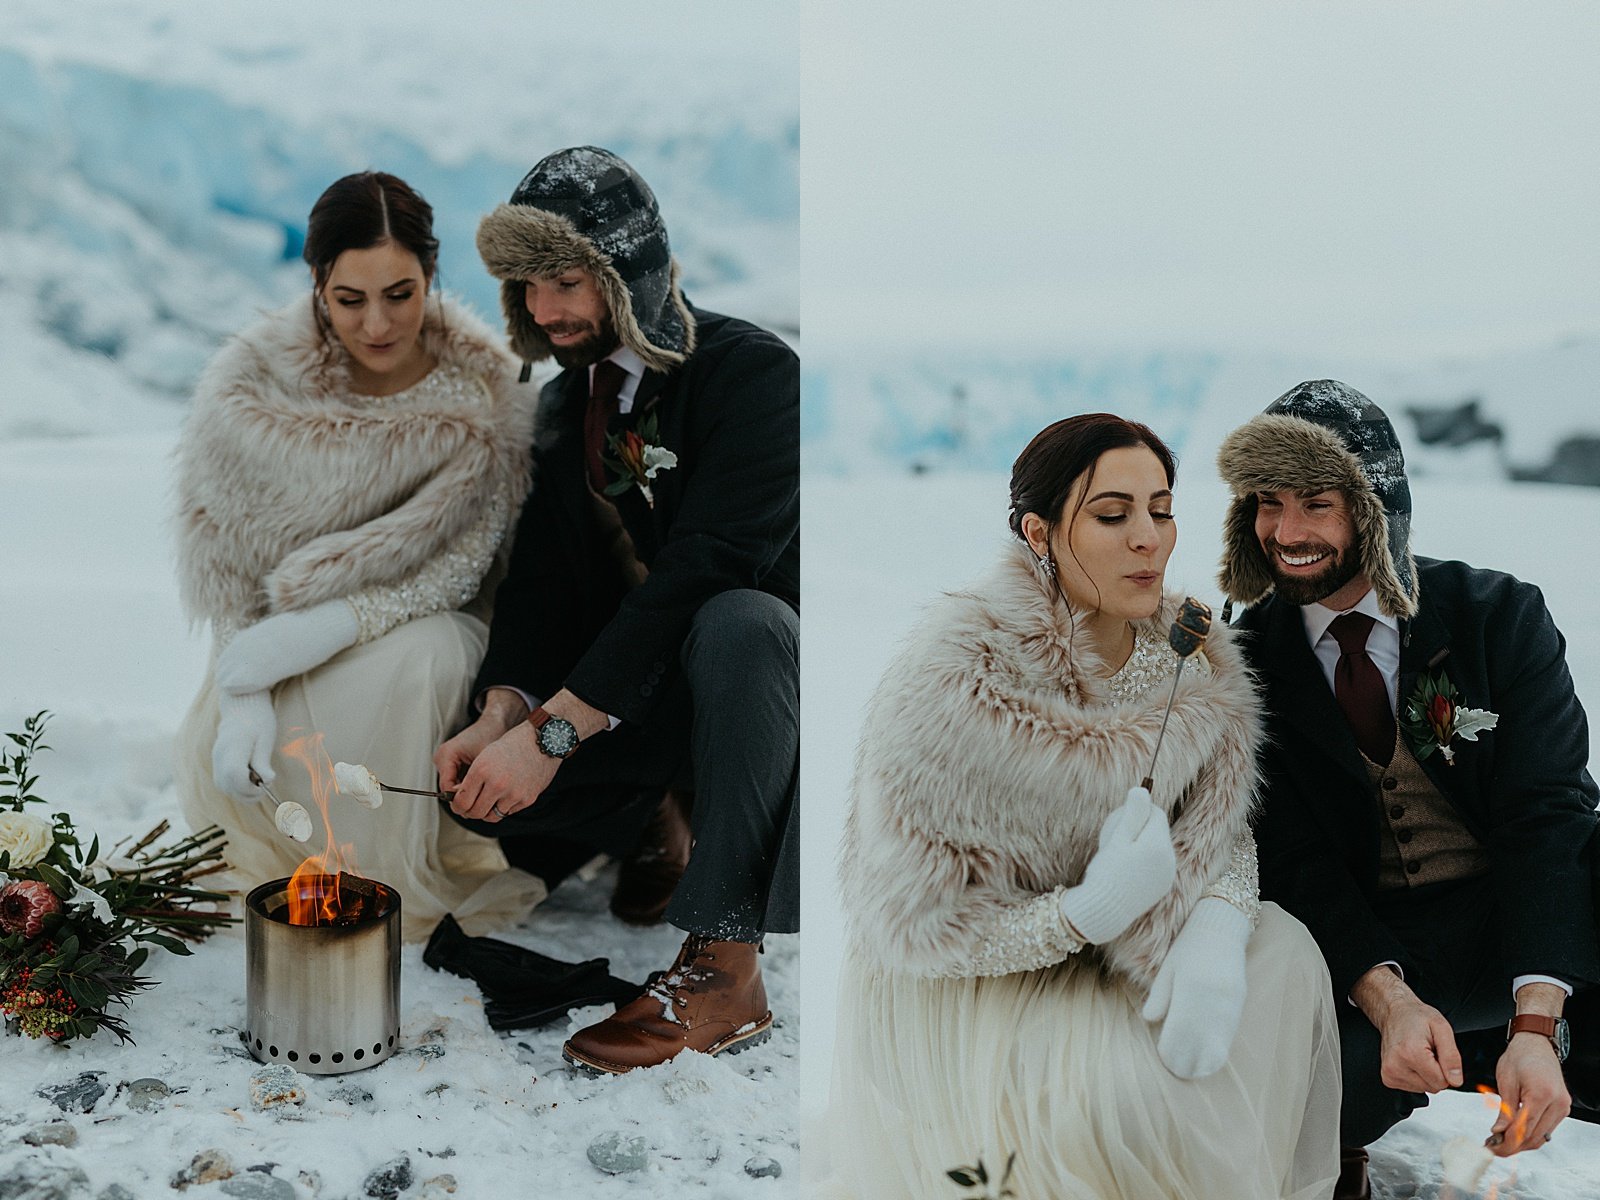  Newlyweds share a smore on a mountain after their glacier adventure elopement 